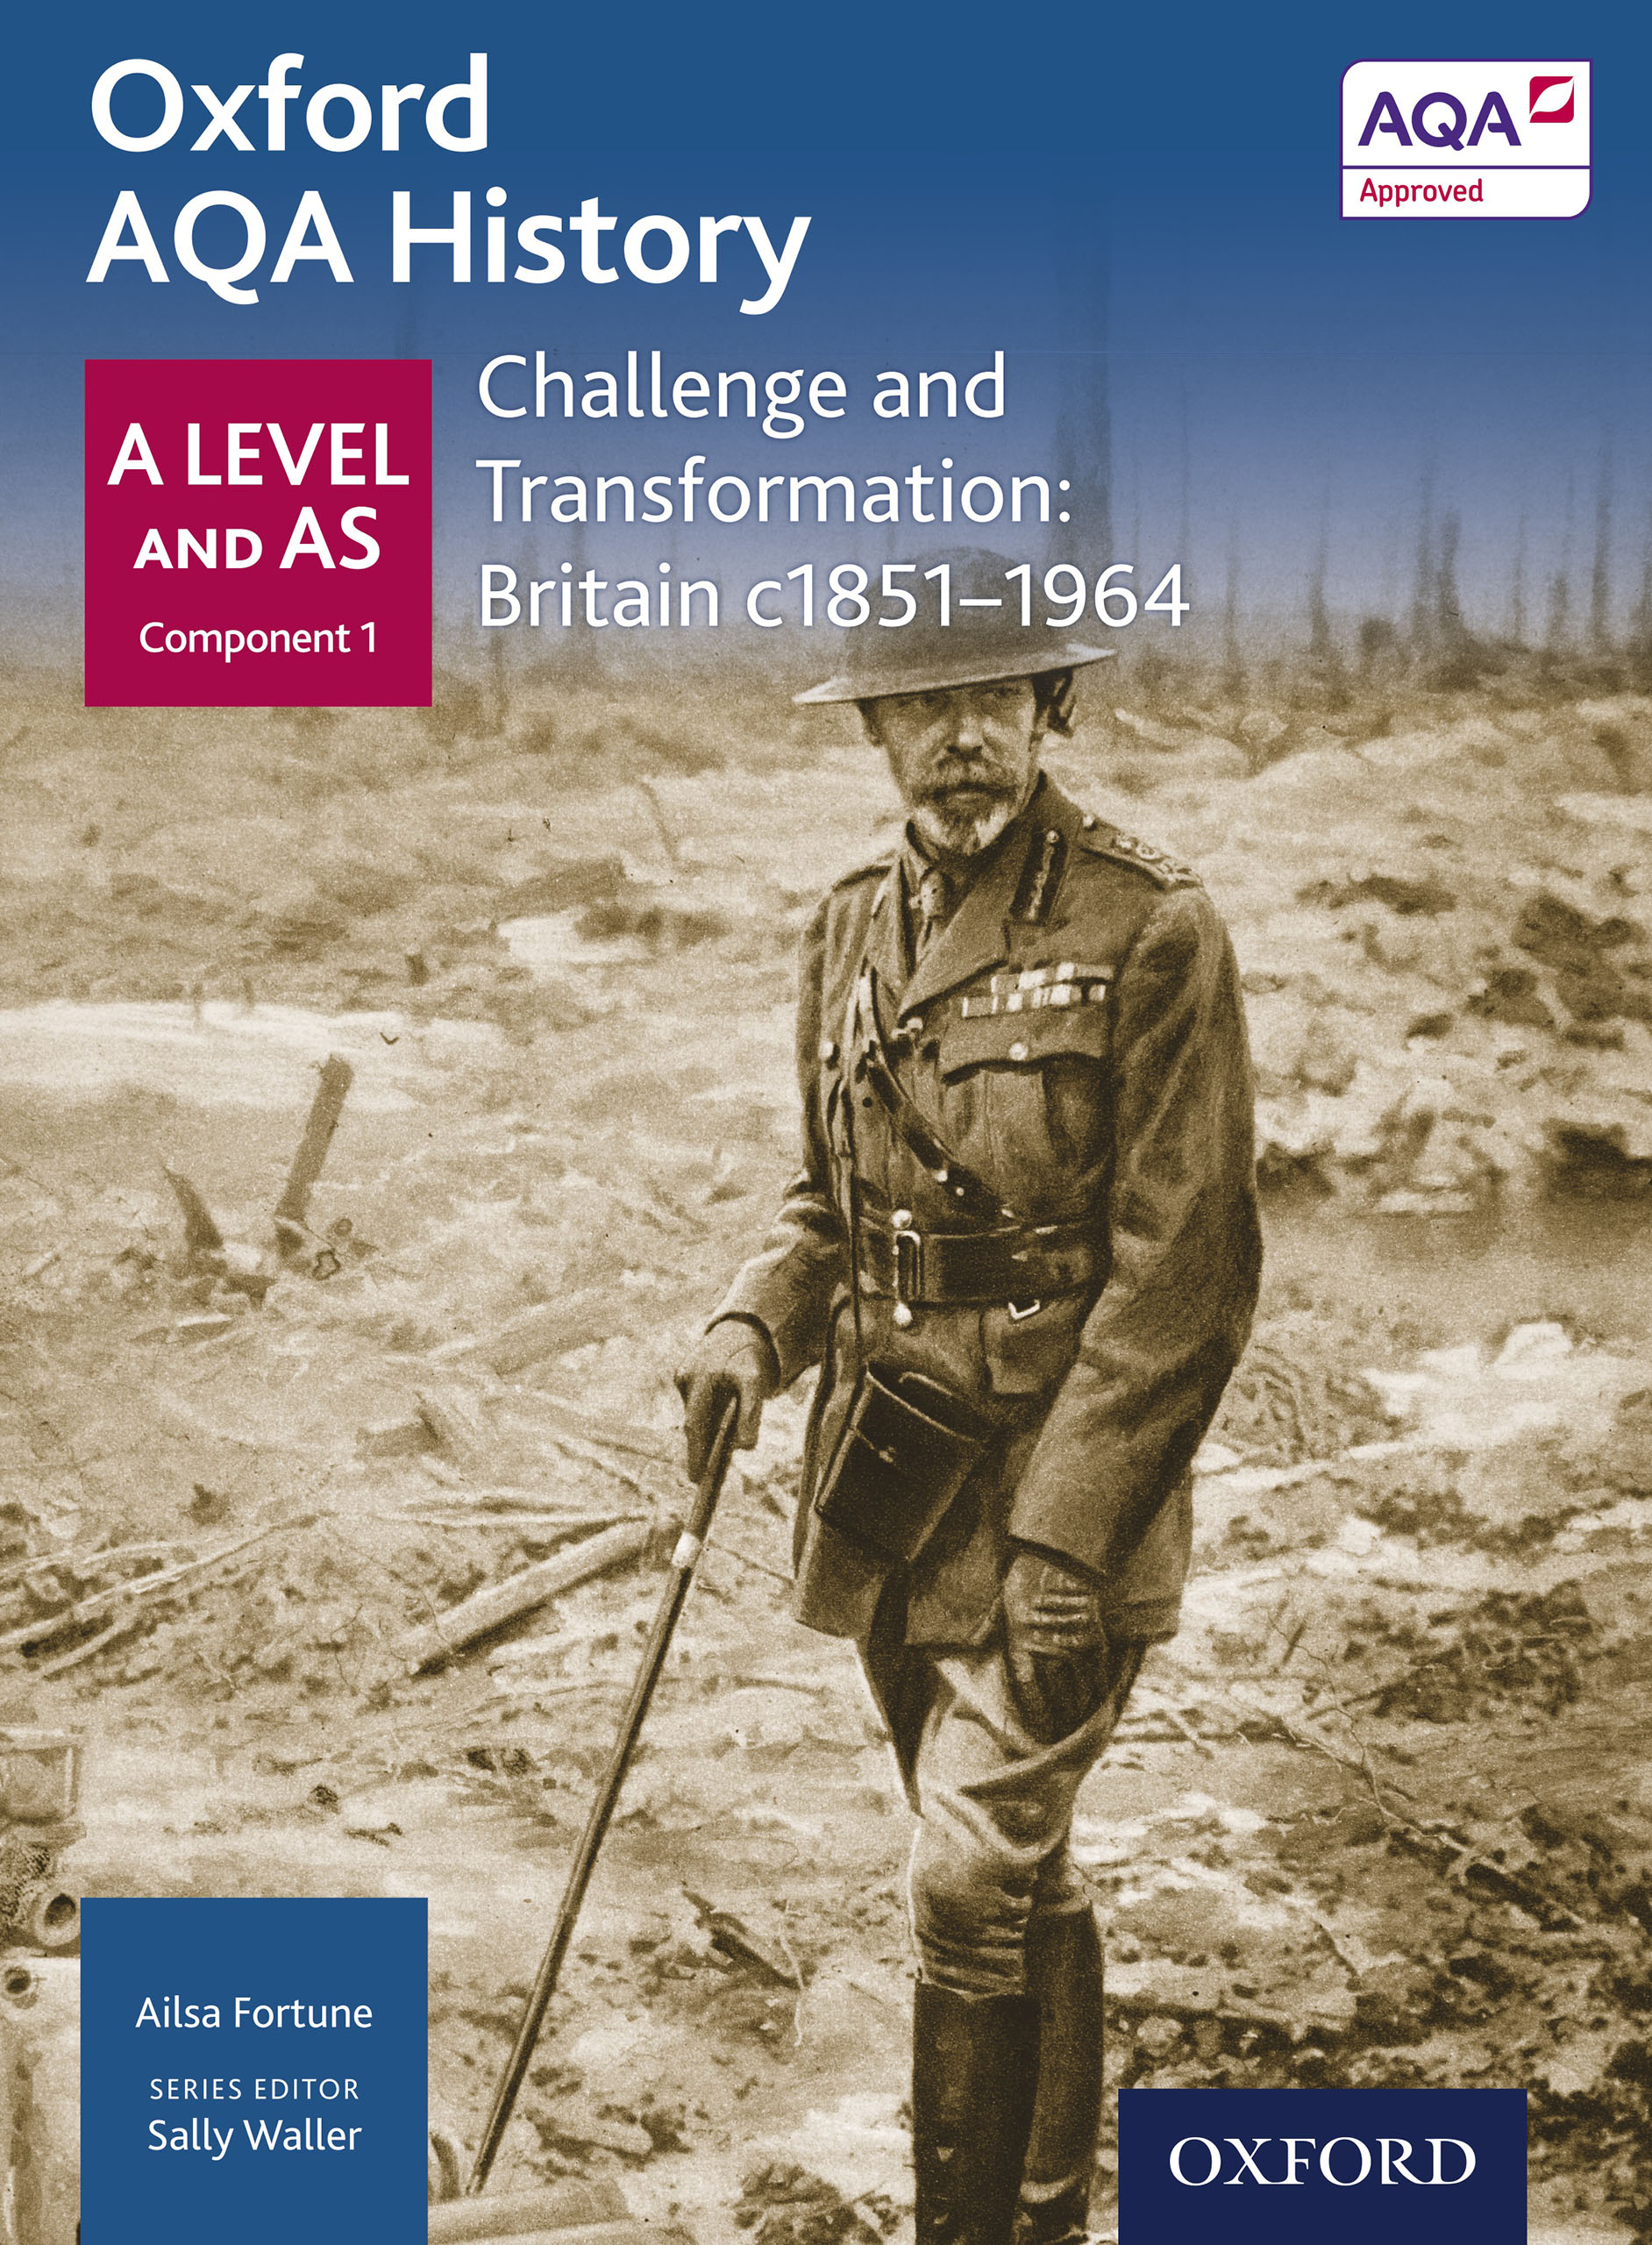 Oxford AQA History A Level and AS Component 1 Challenge and